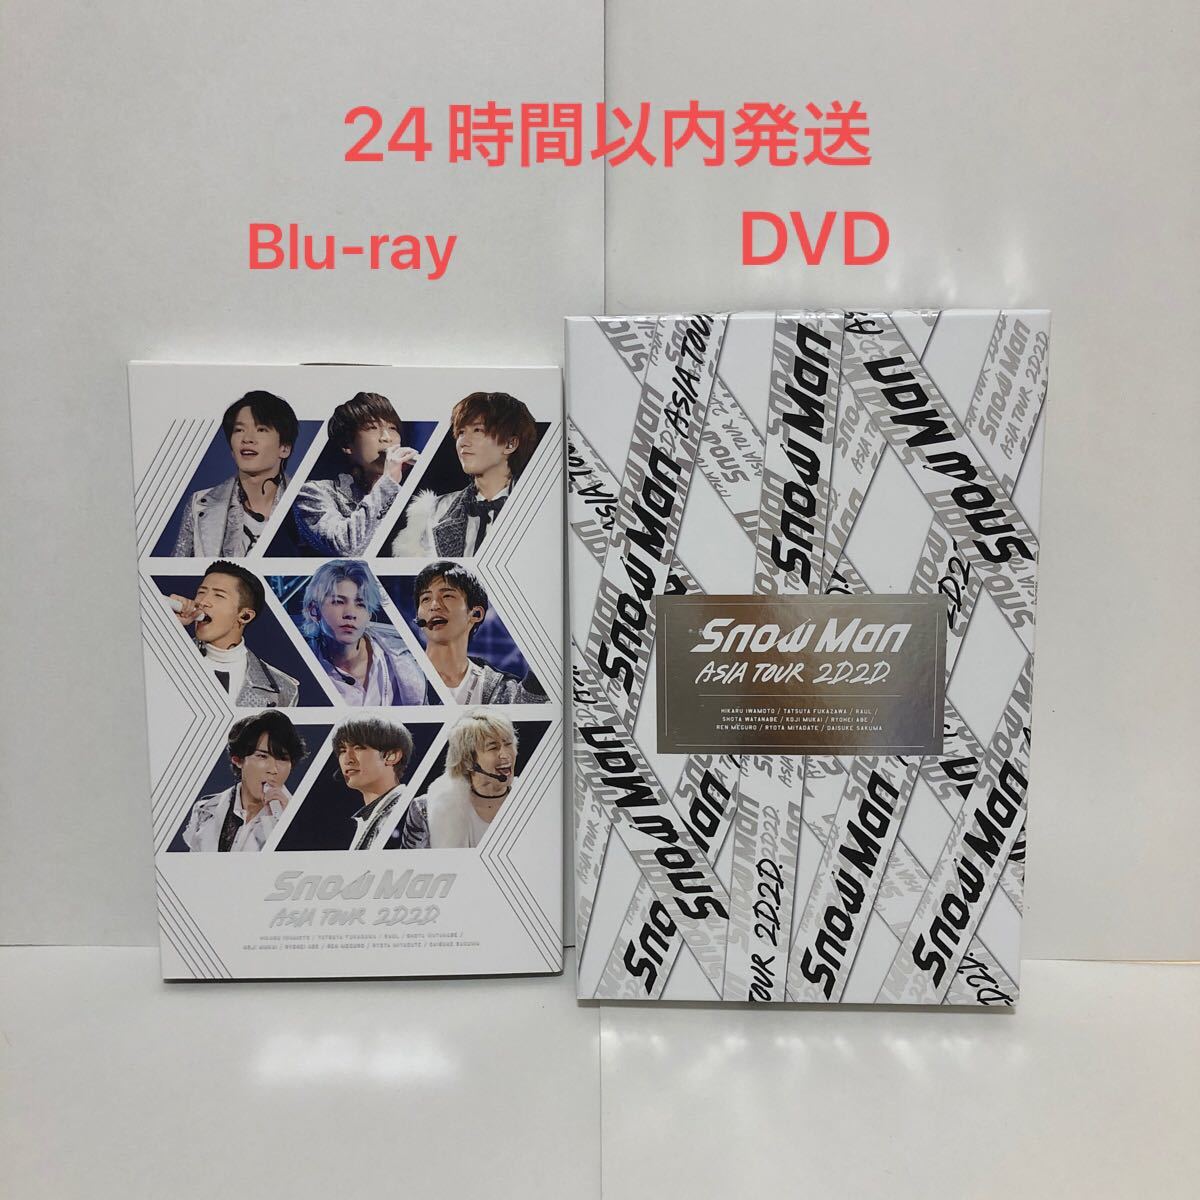 SnowMan ライブDVD Blu-ray ASIA TOUR 2D2D 初回盤&通常盤セット